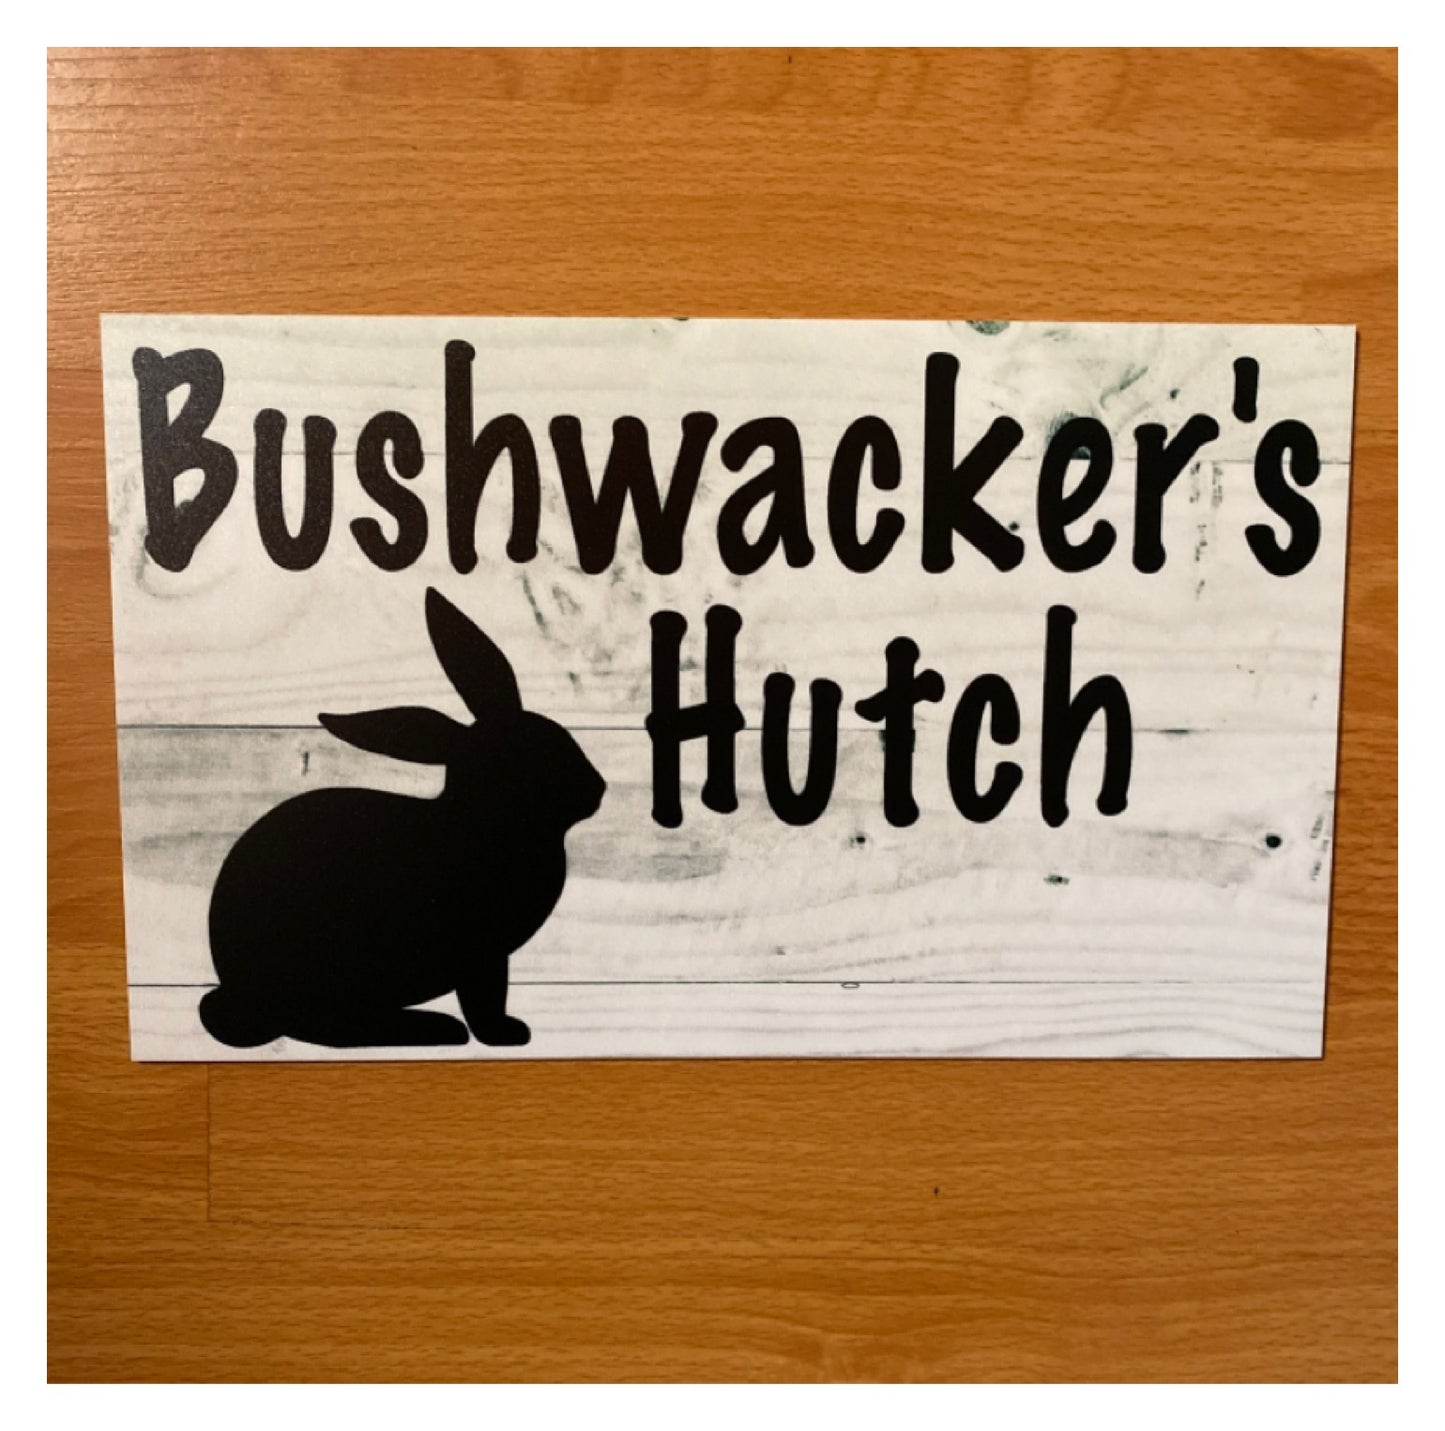 Rabbit Hutch House Pets Name Custom Wording Sign - The Renmy Store Homewares & Gifts 